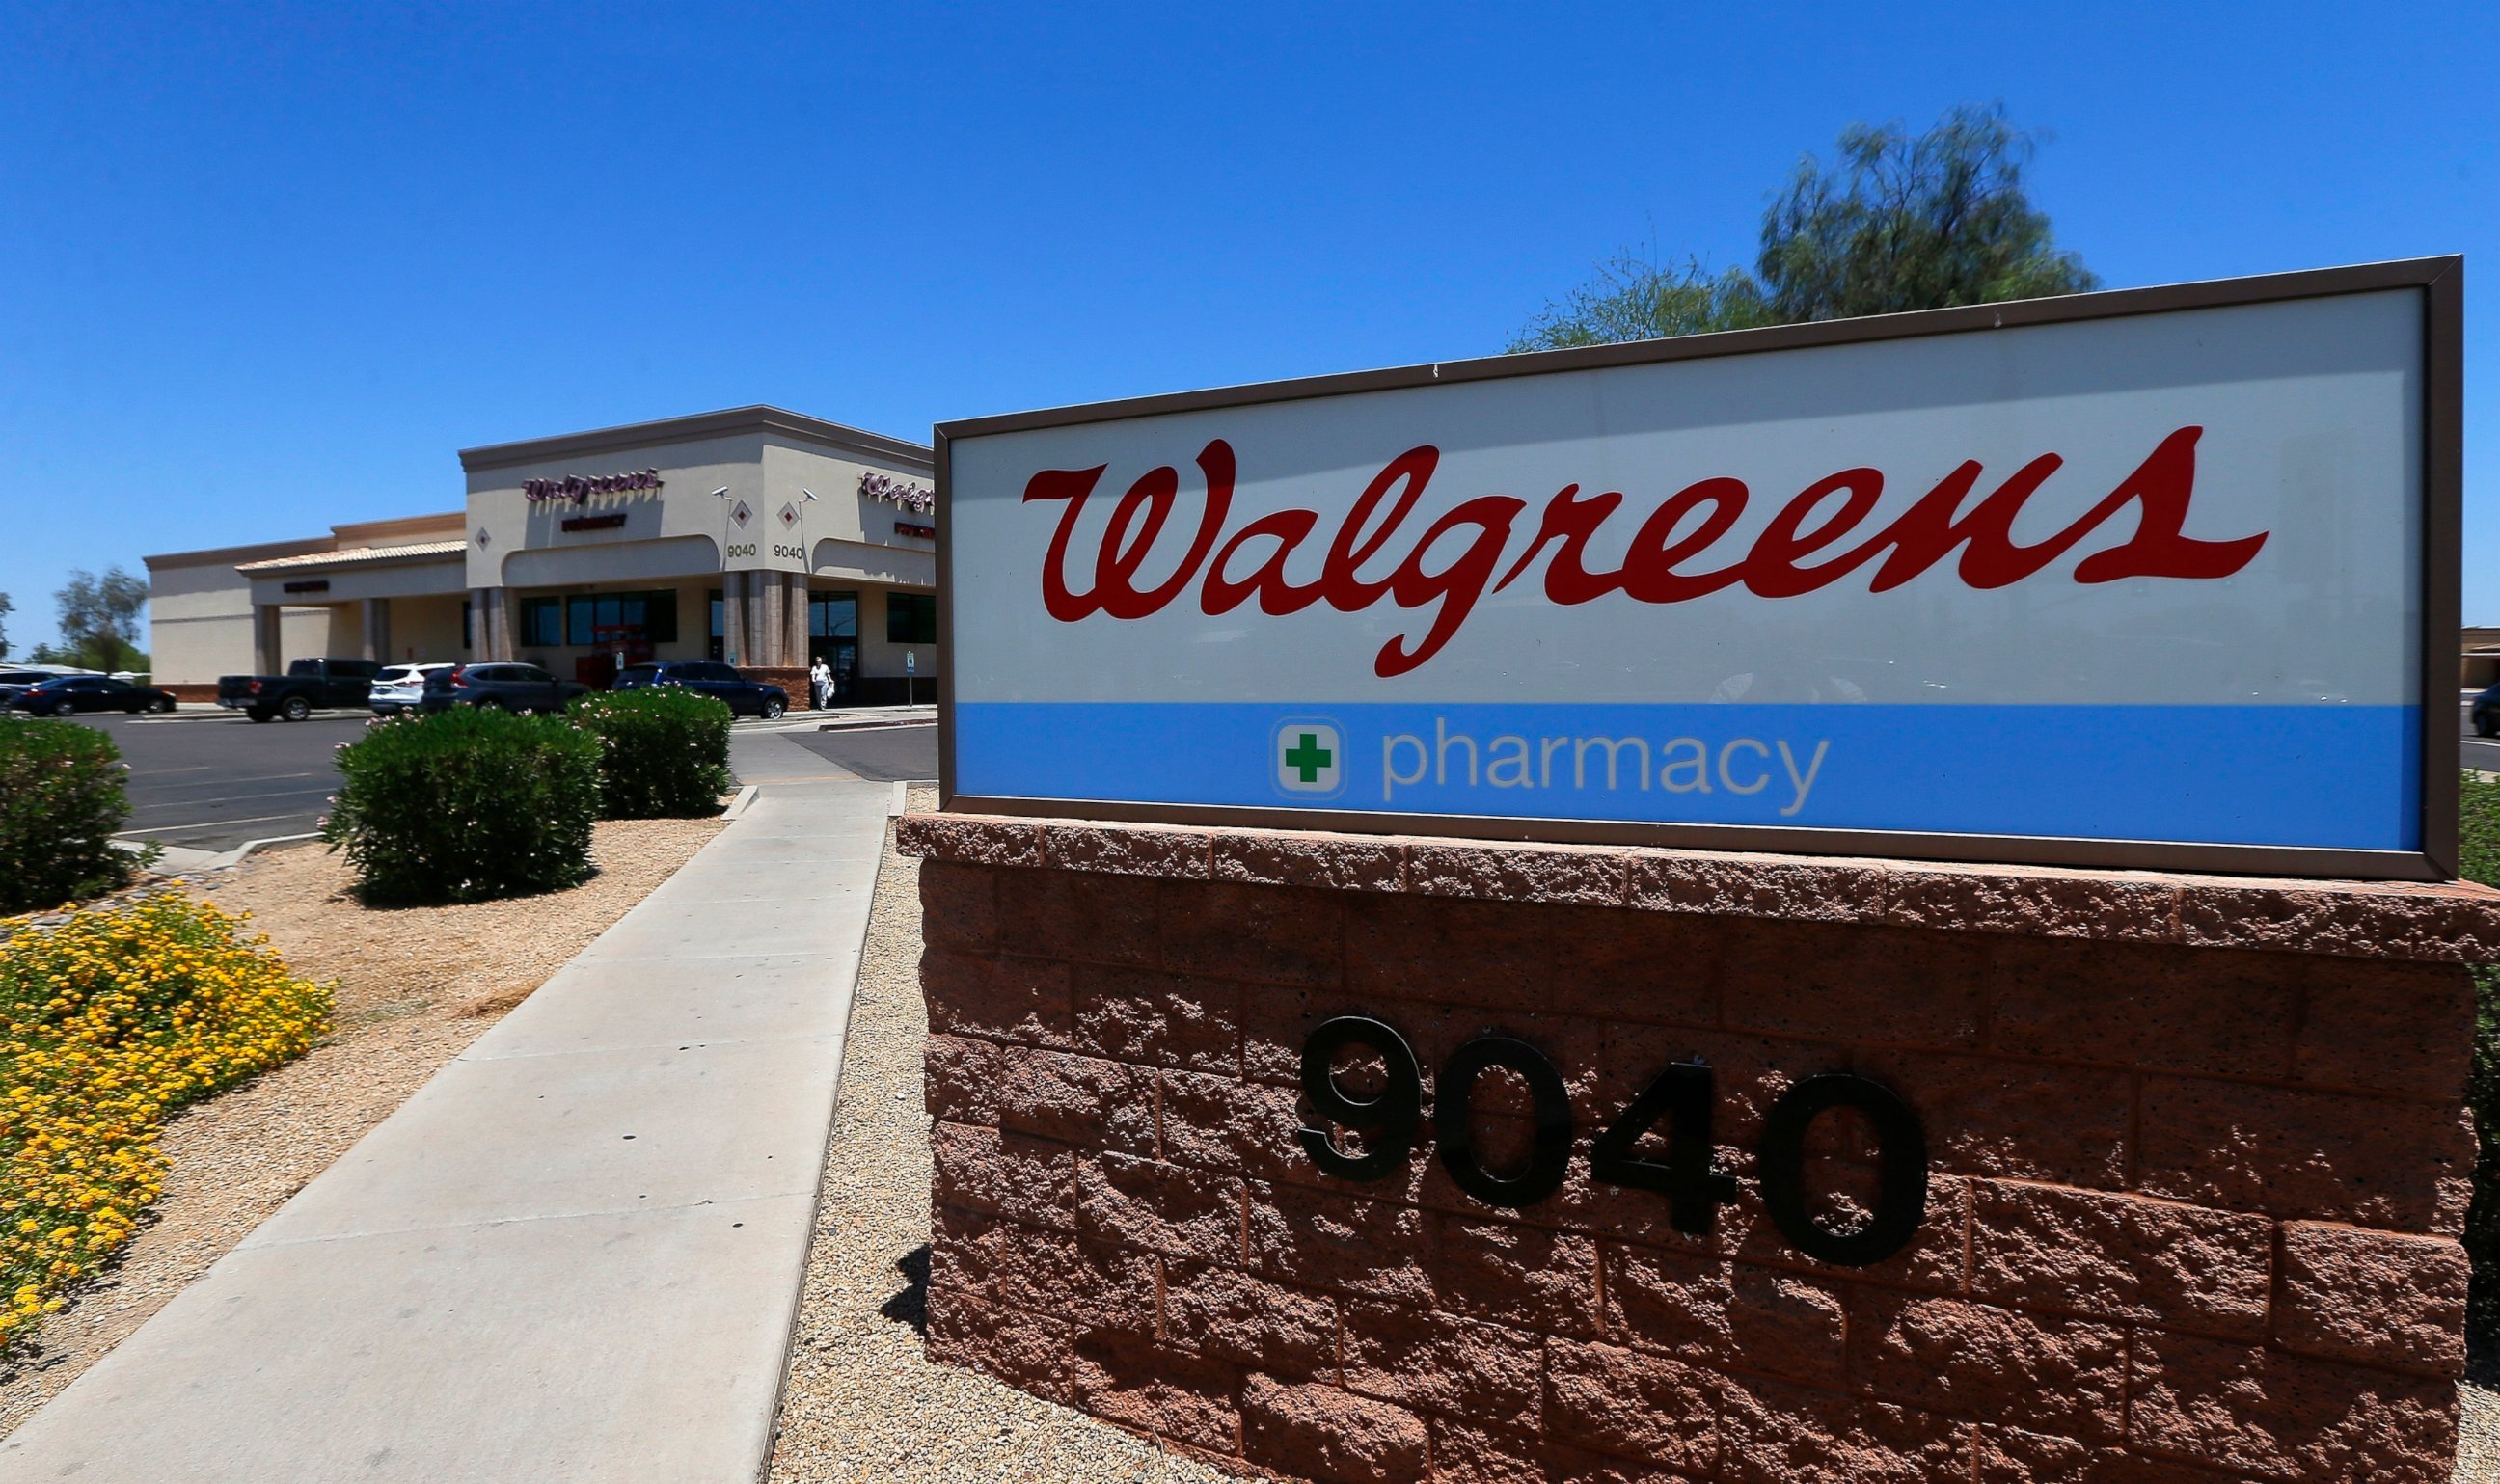 PHOTO: This June 25, 2018 file photo shows Walgreens in Peoria, Ariz.